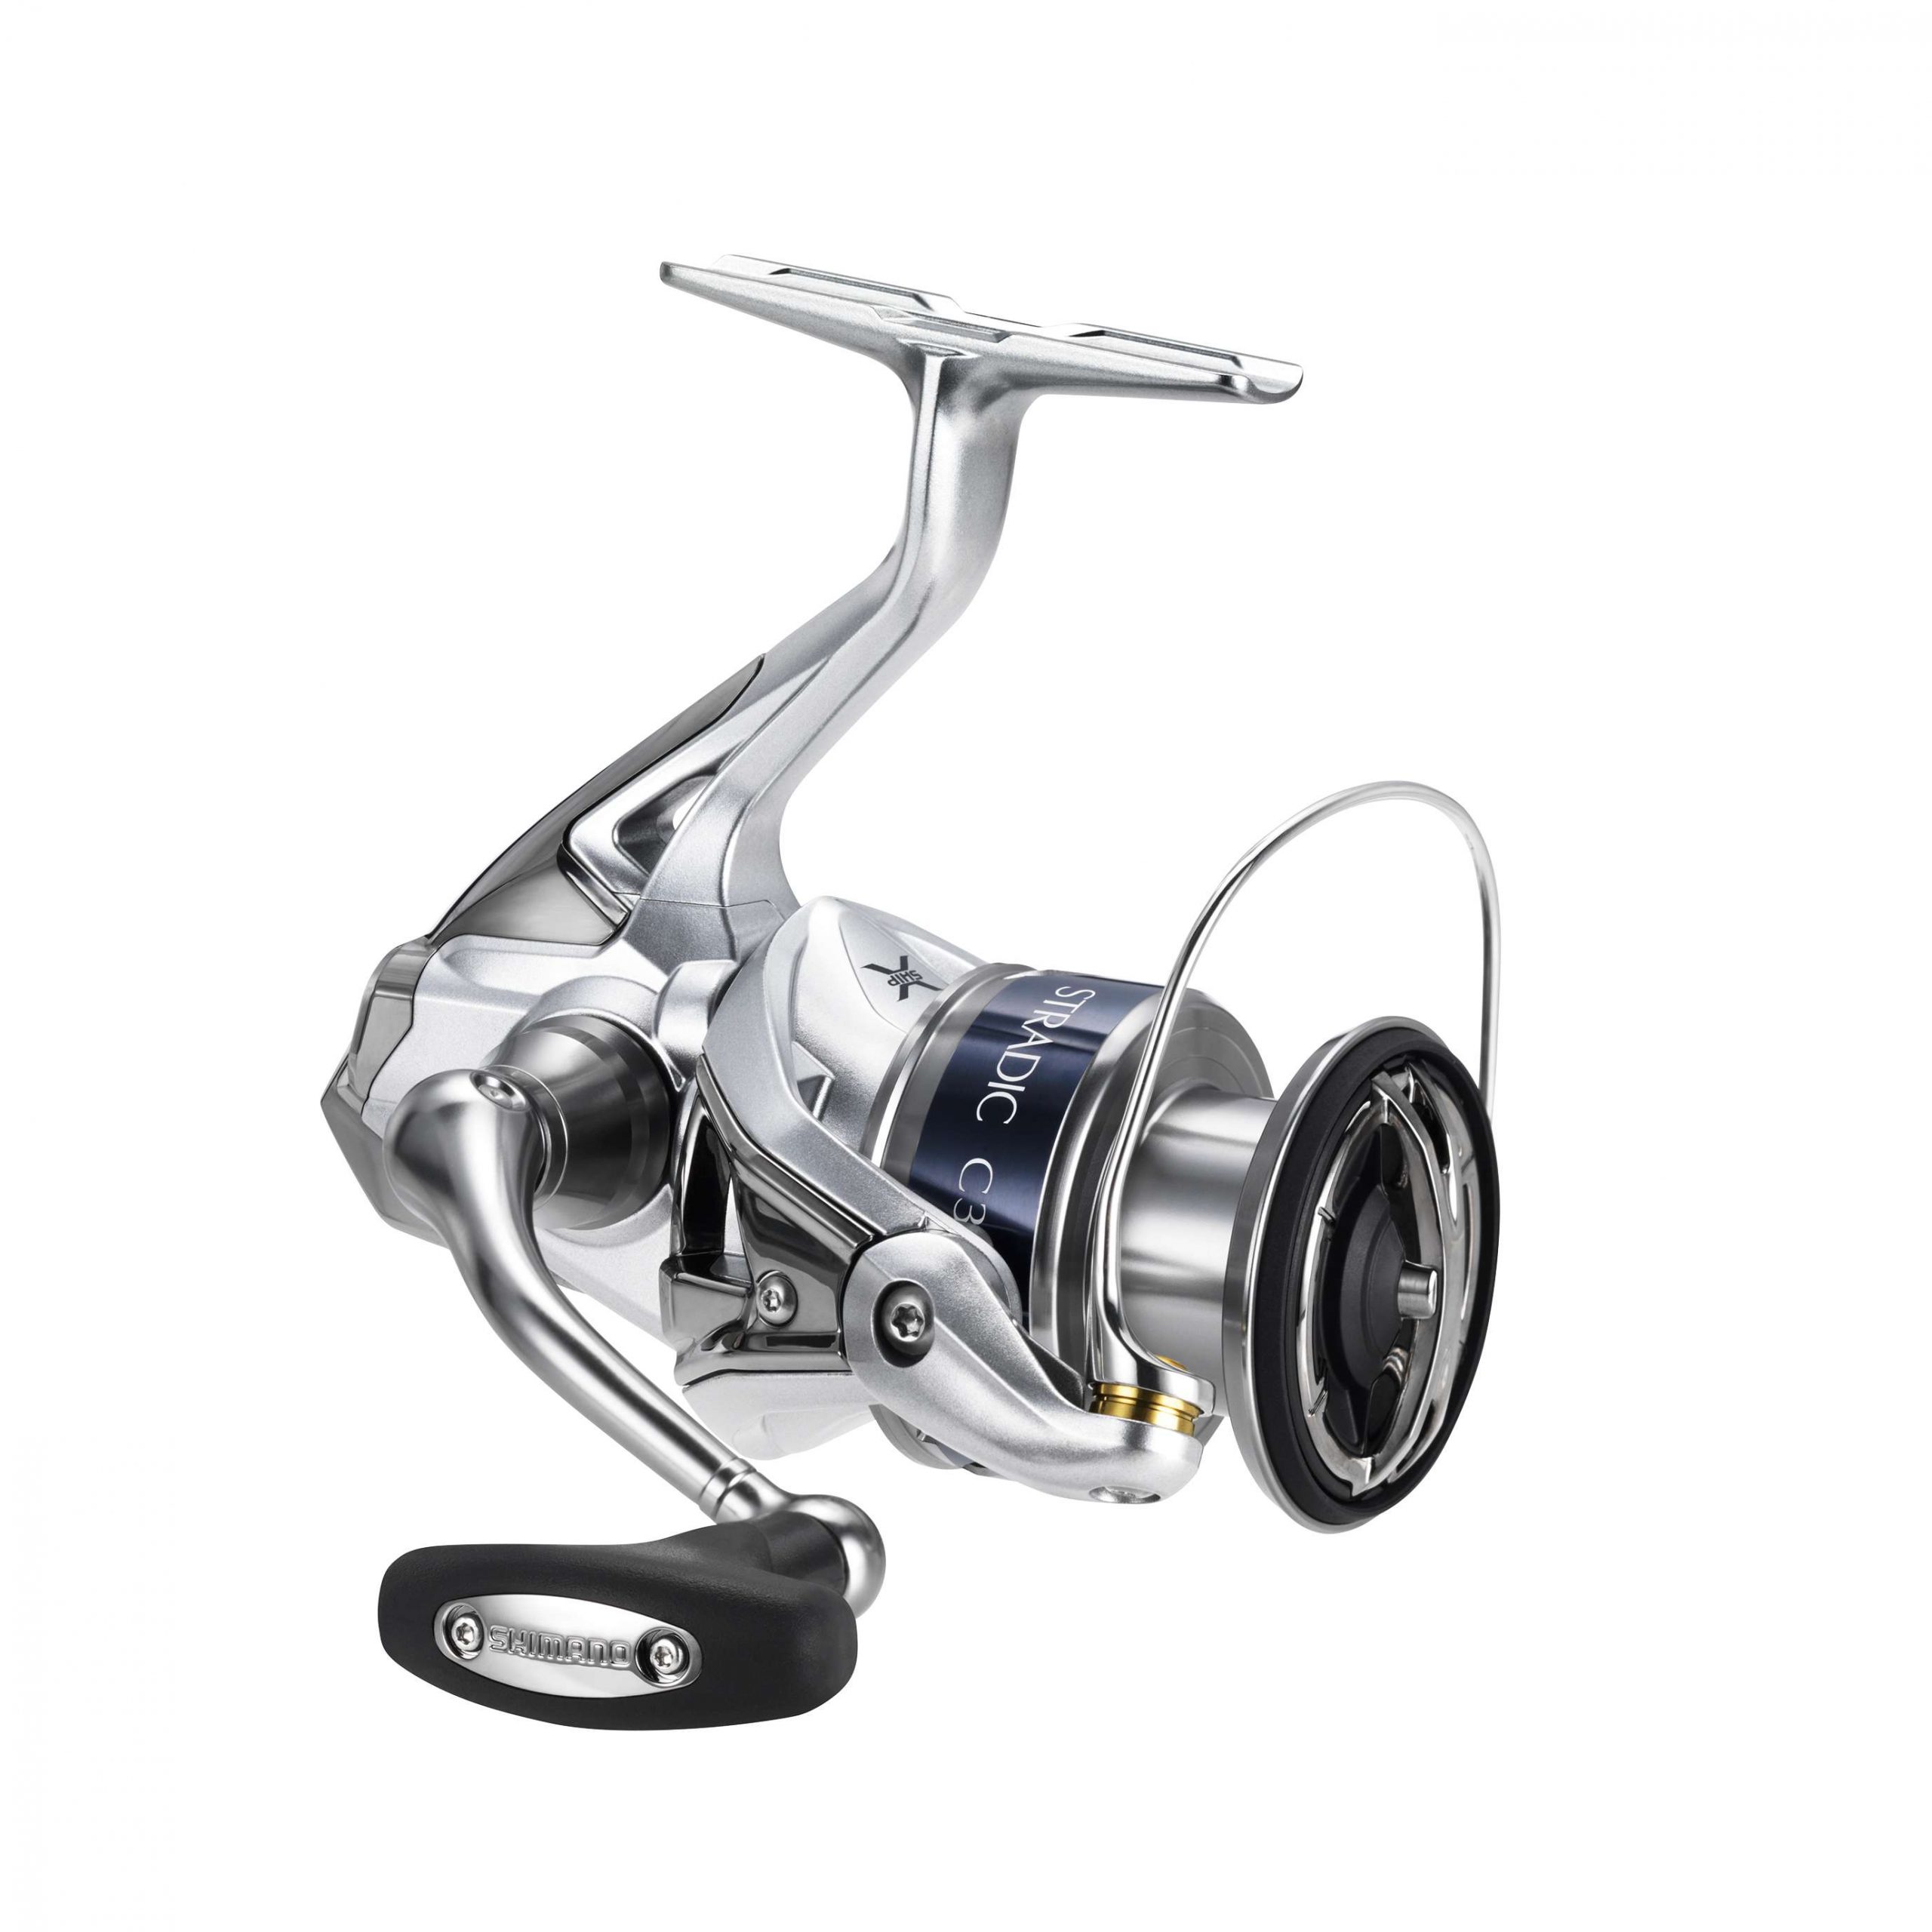 <b>Shimano</b><br>	Stradic FX Spinning Reel<br>			Shimano has updated their Stradic line of spinning reels for this year. Shimano says they provide the most demanding bass anglers with the needed smoothness and durability for fishing tubes, jigs and finesse baits for smallmouth and largemouth.